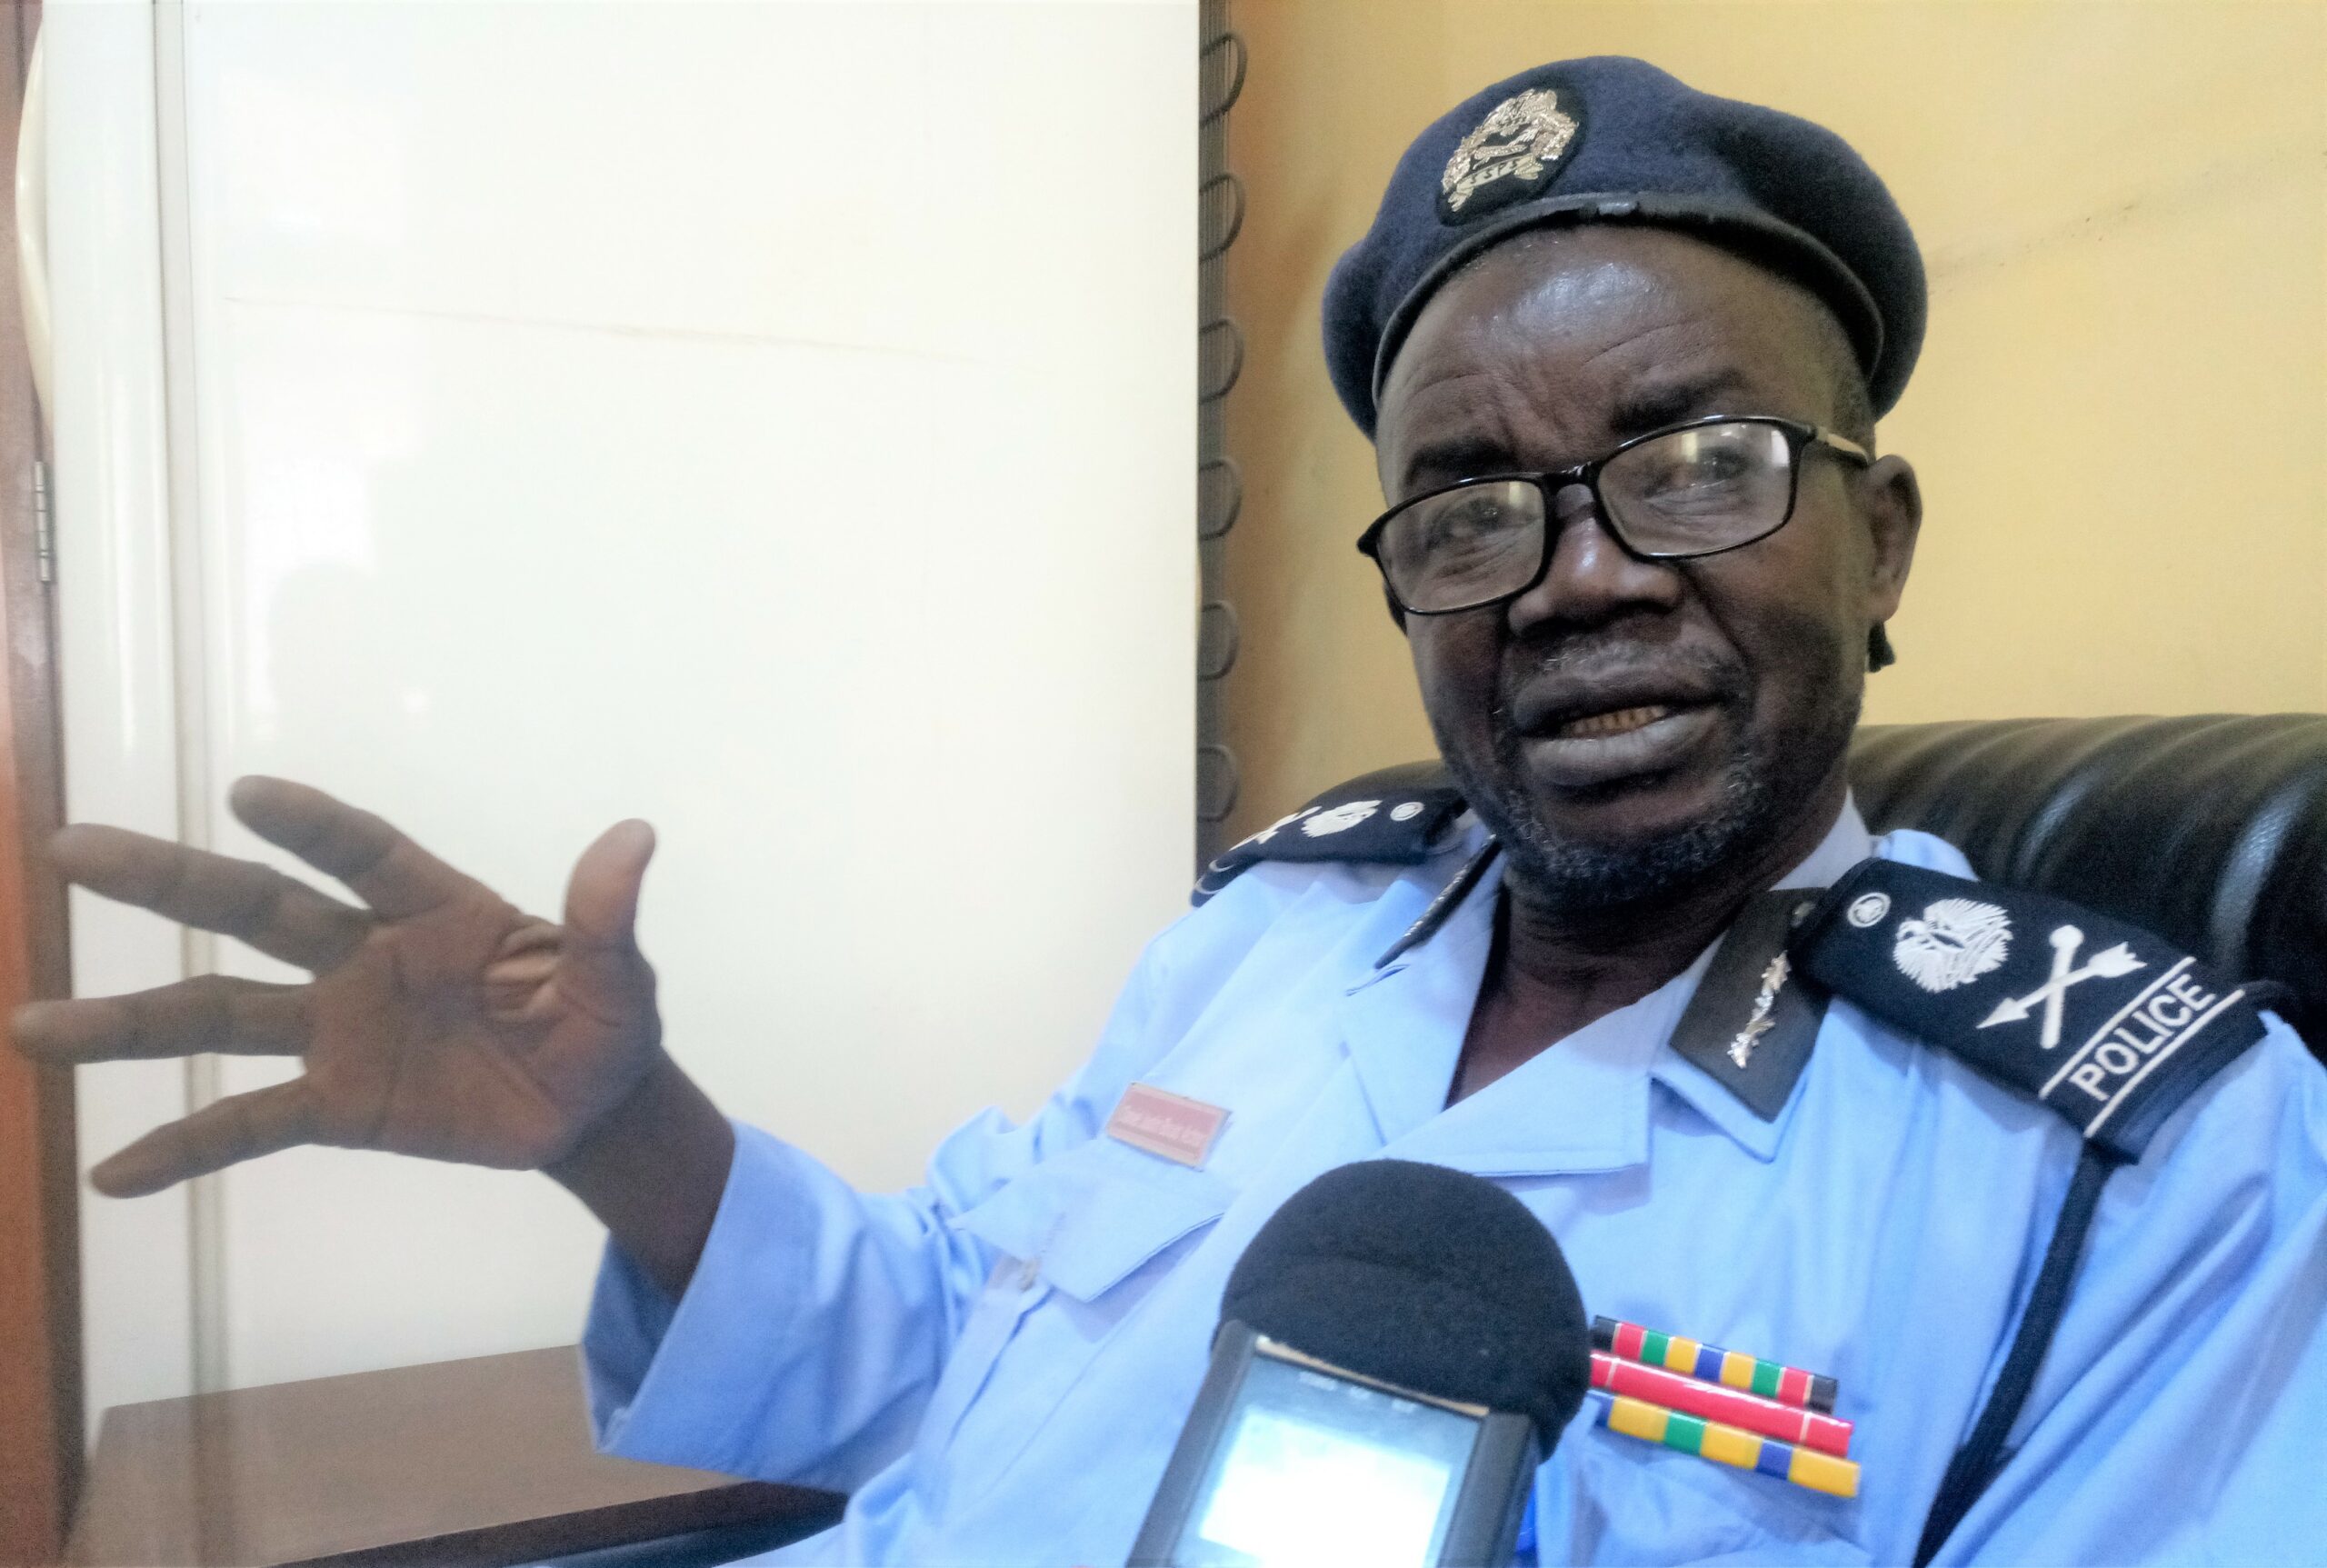 11 arrested in killing of riders, looting of motorcycles in Juba